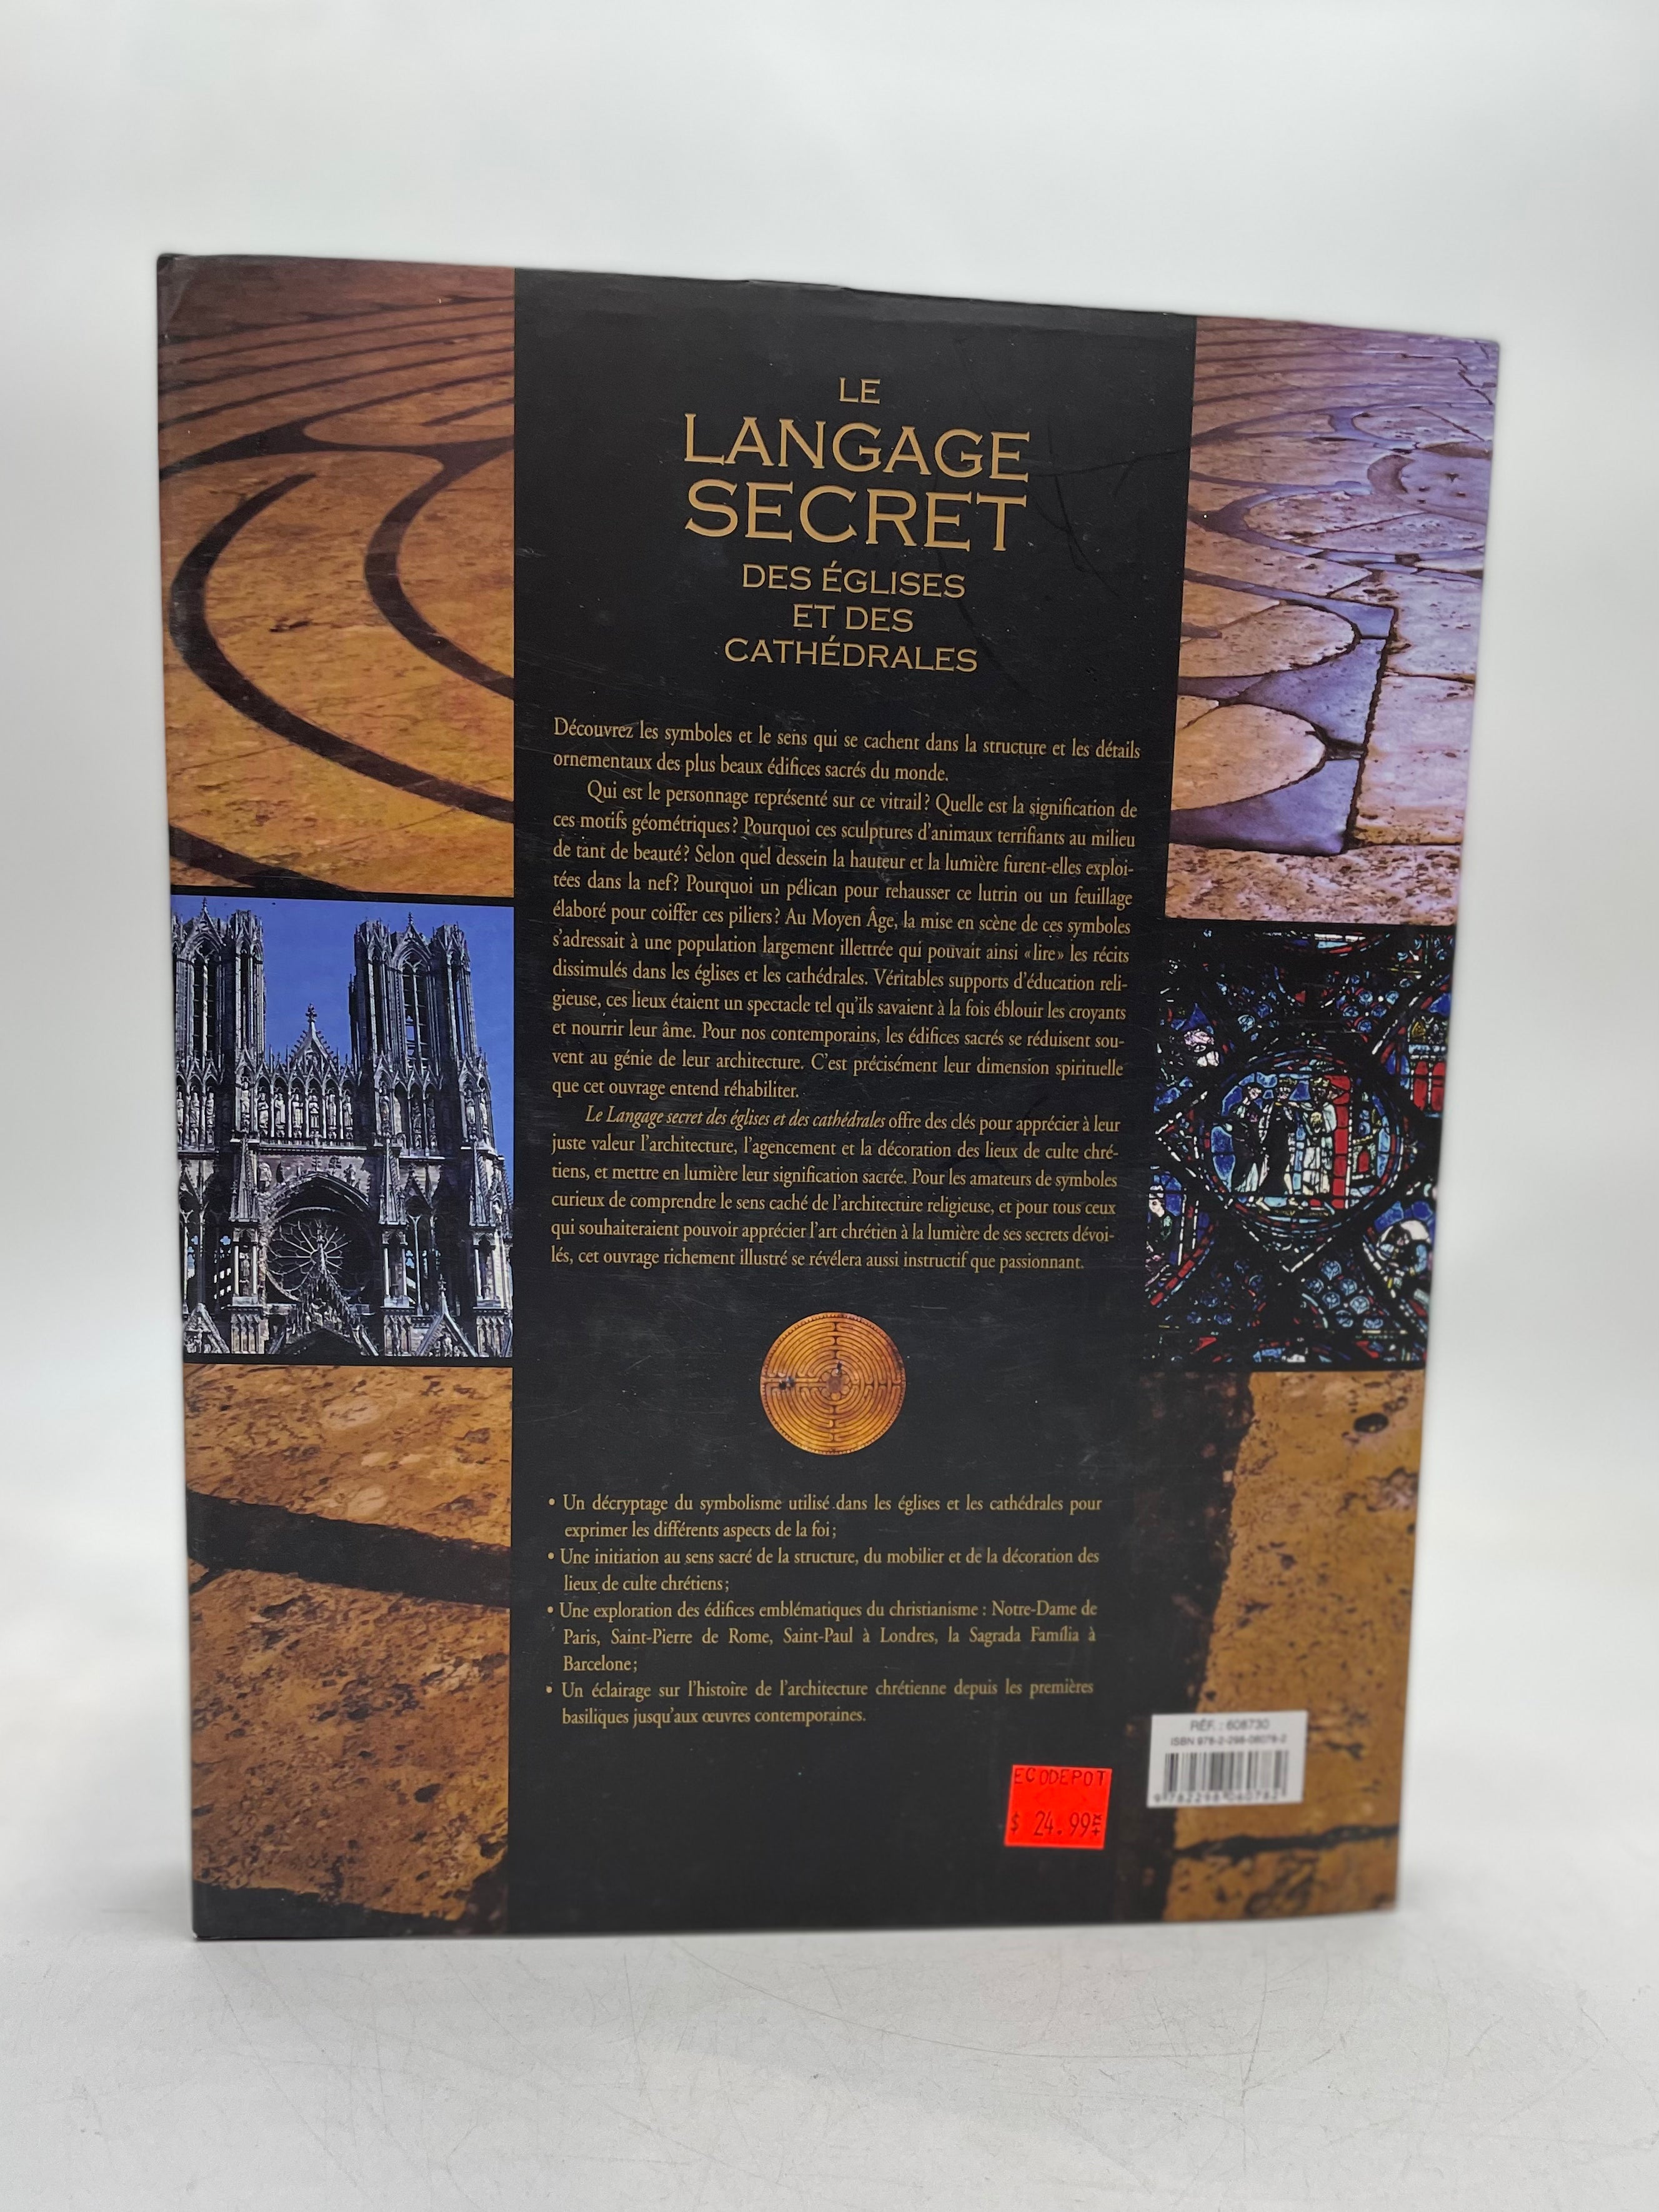 The Secret Language of Churches and Cathedrals Hardcover, 2011 (VF)